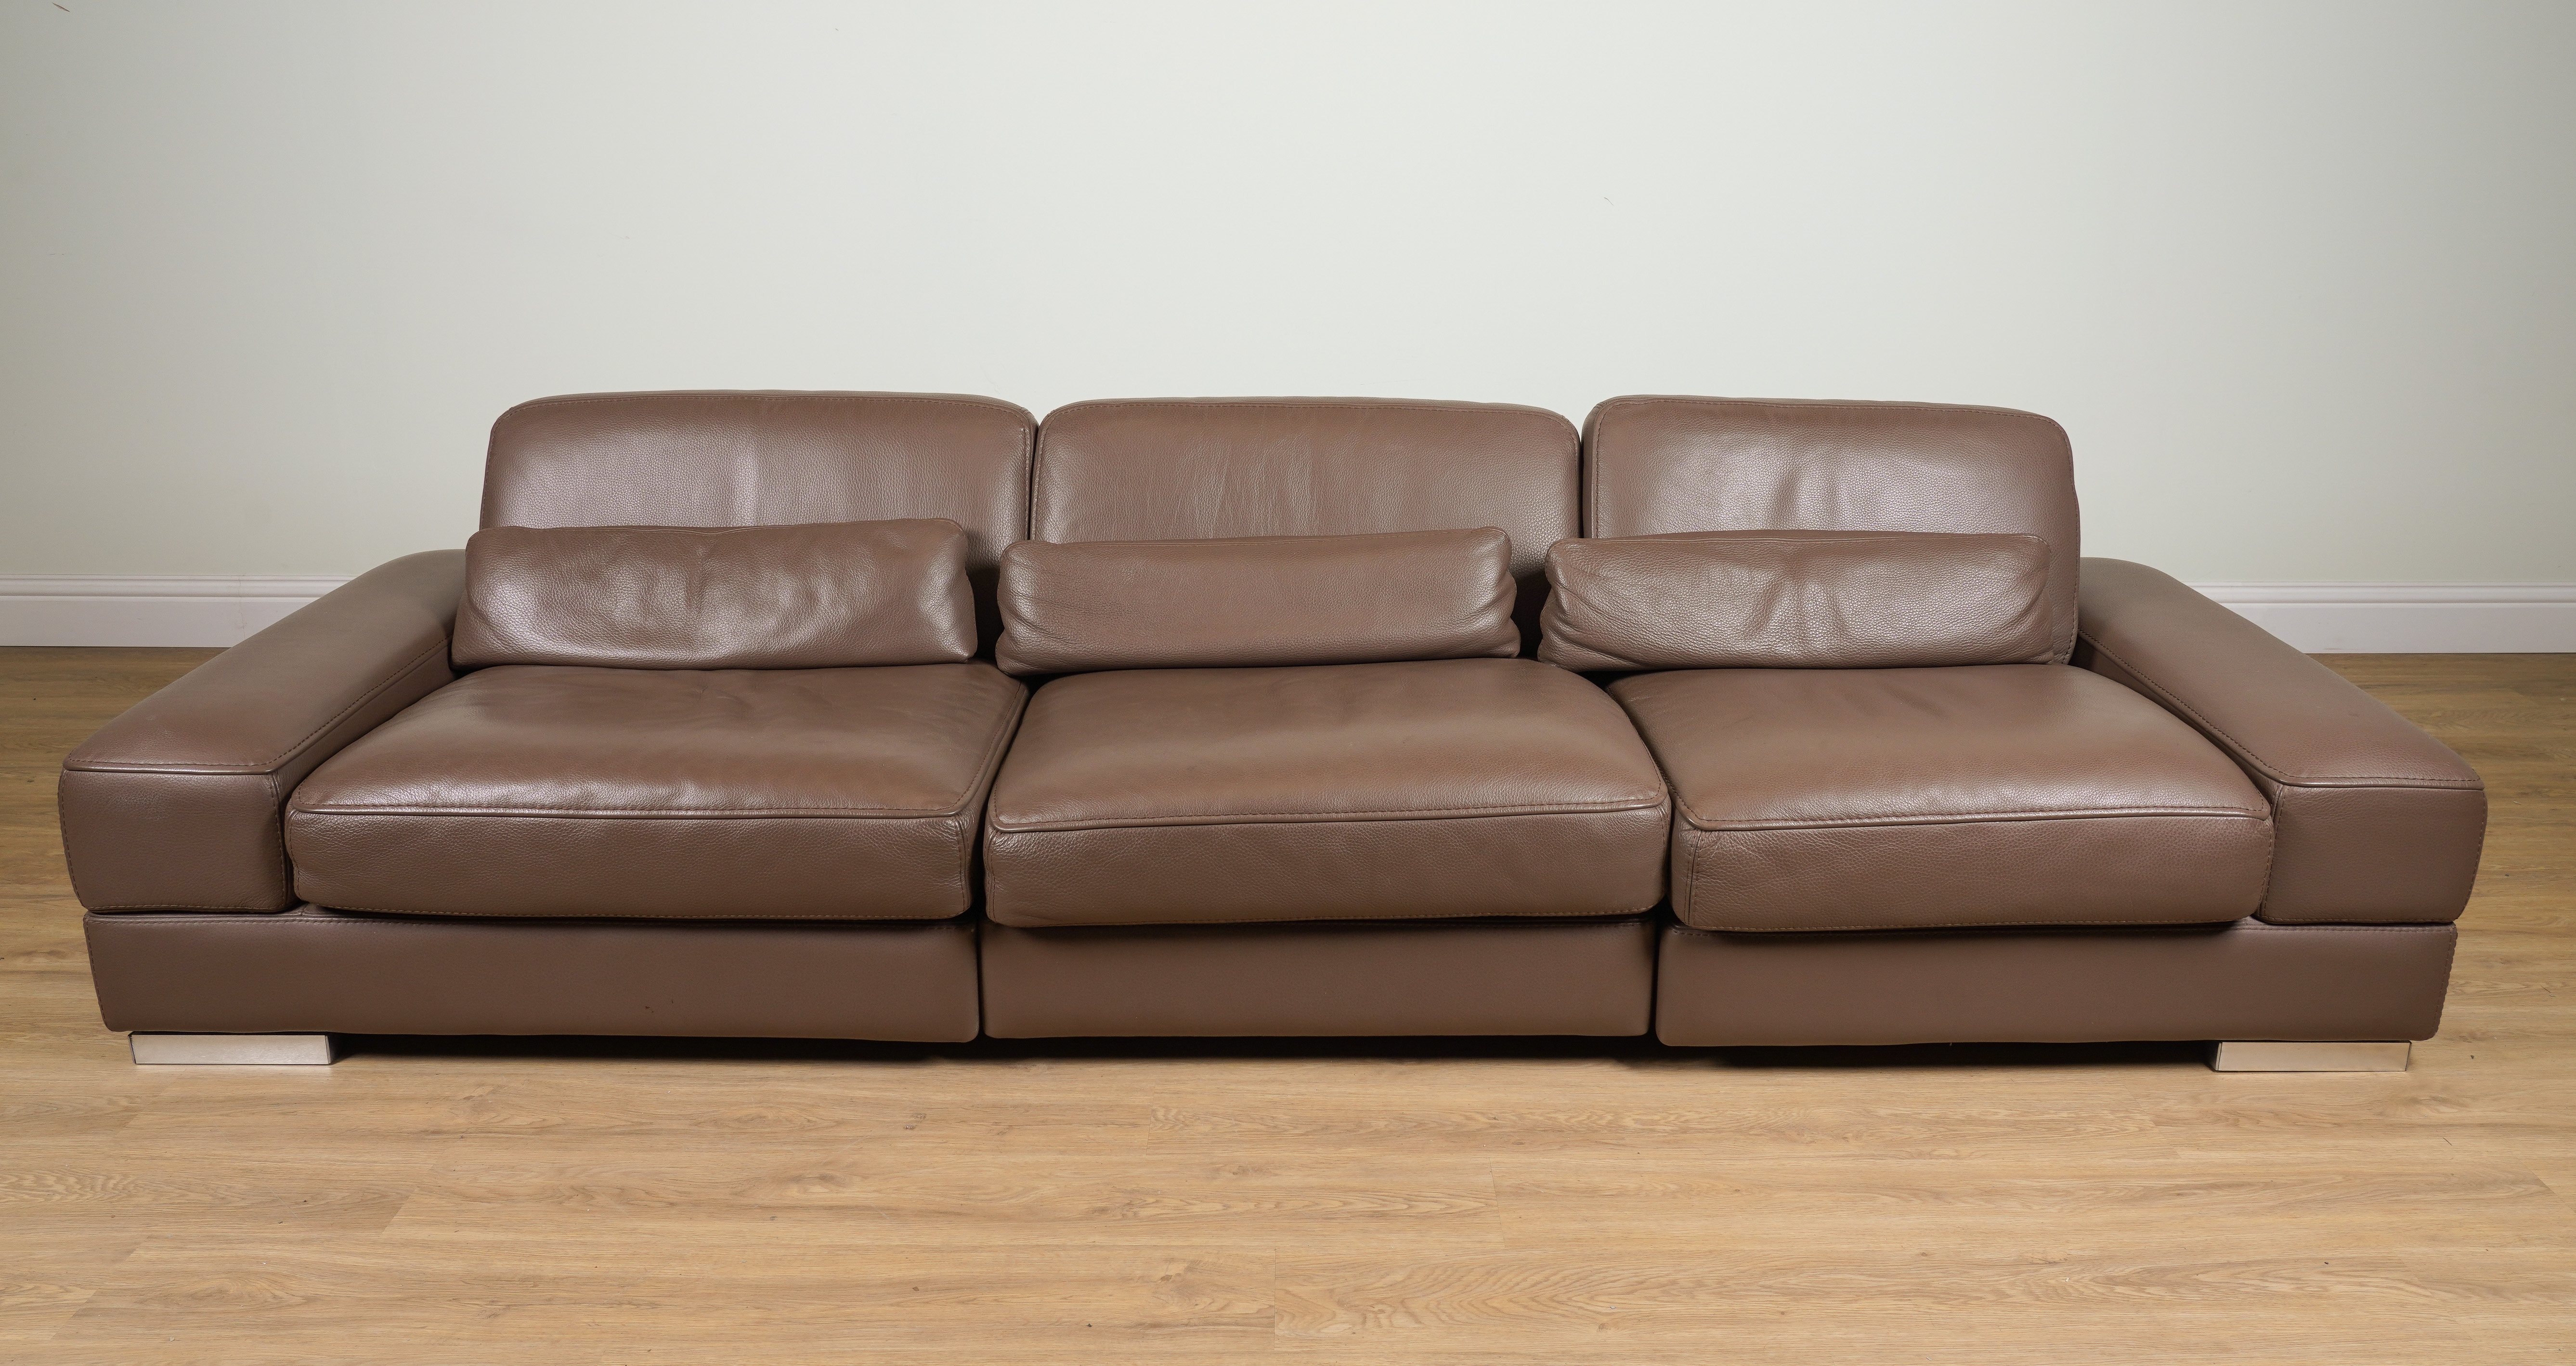 ROCHE BOBOIS A BROWN LEATHER UPHOLSTERED 3ae521